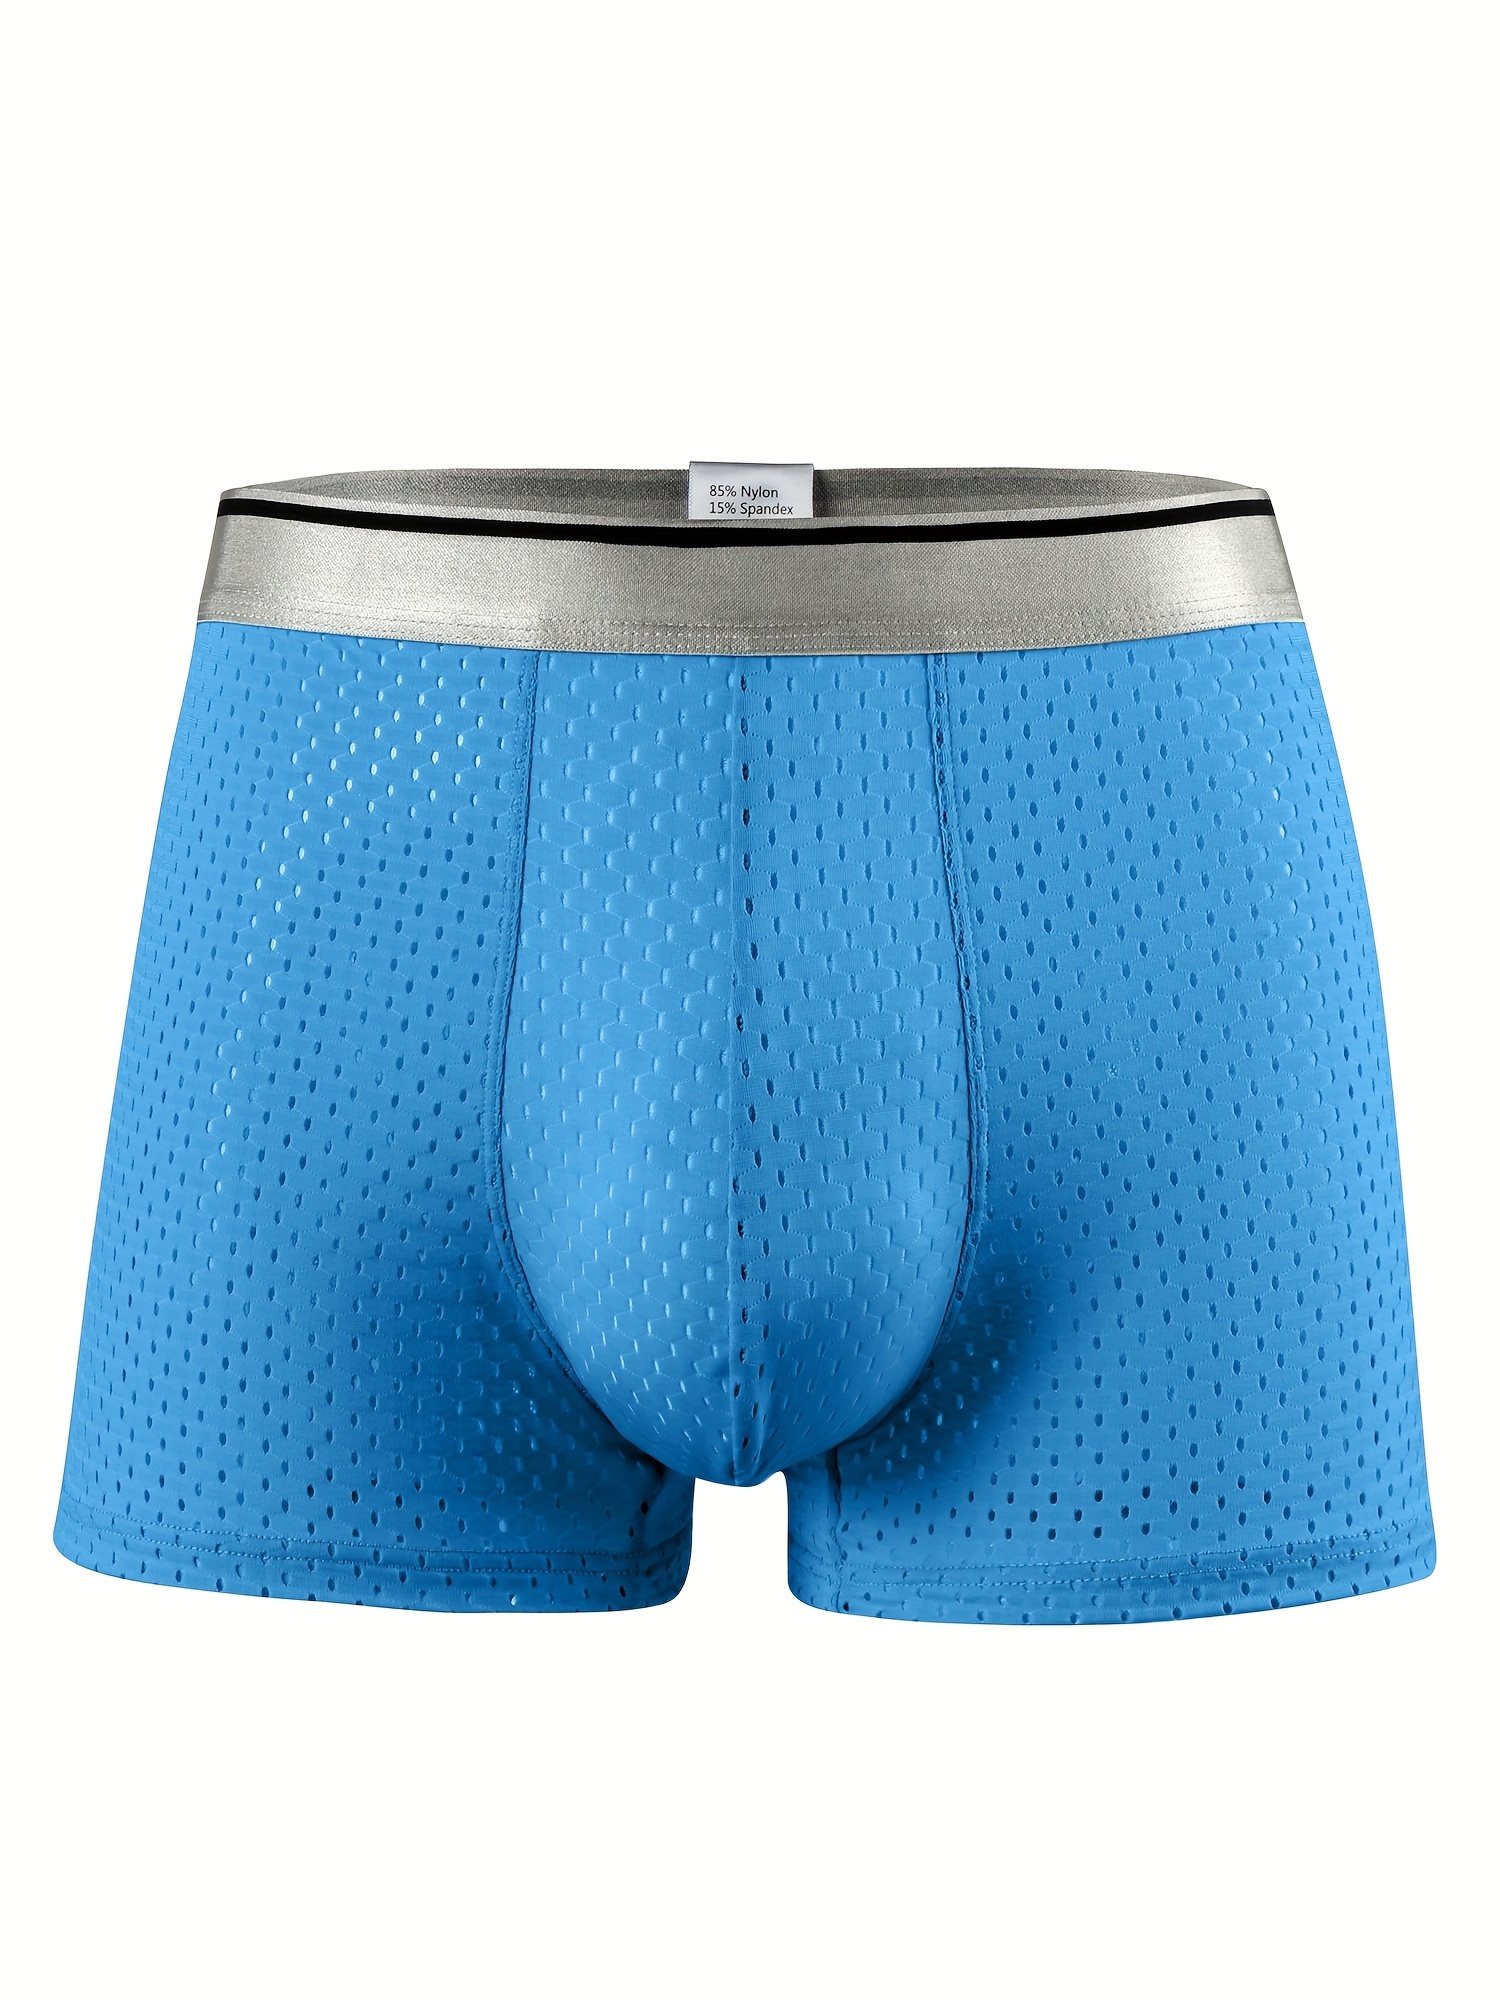 Breathable Boxers for Men Small to Big and Tall Cool Touch Boxer